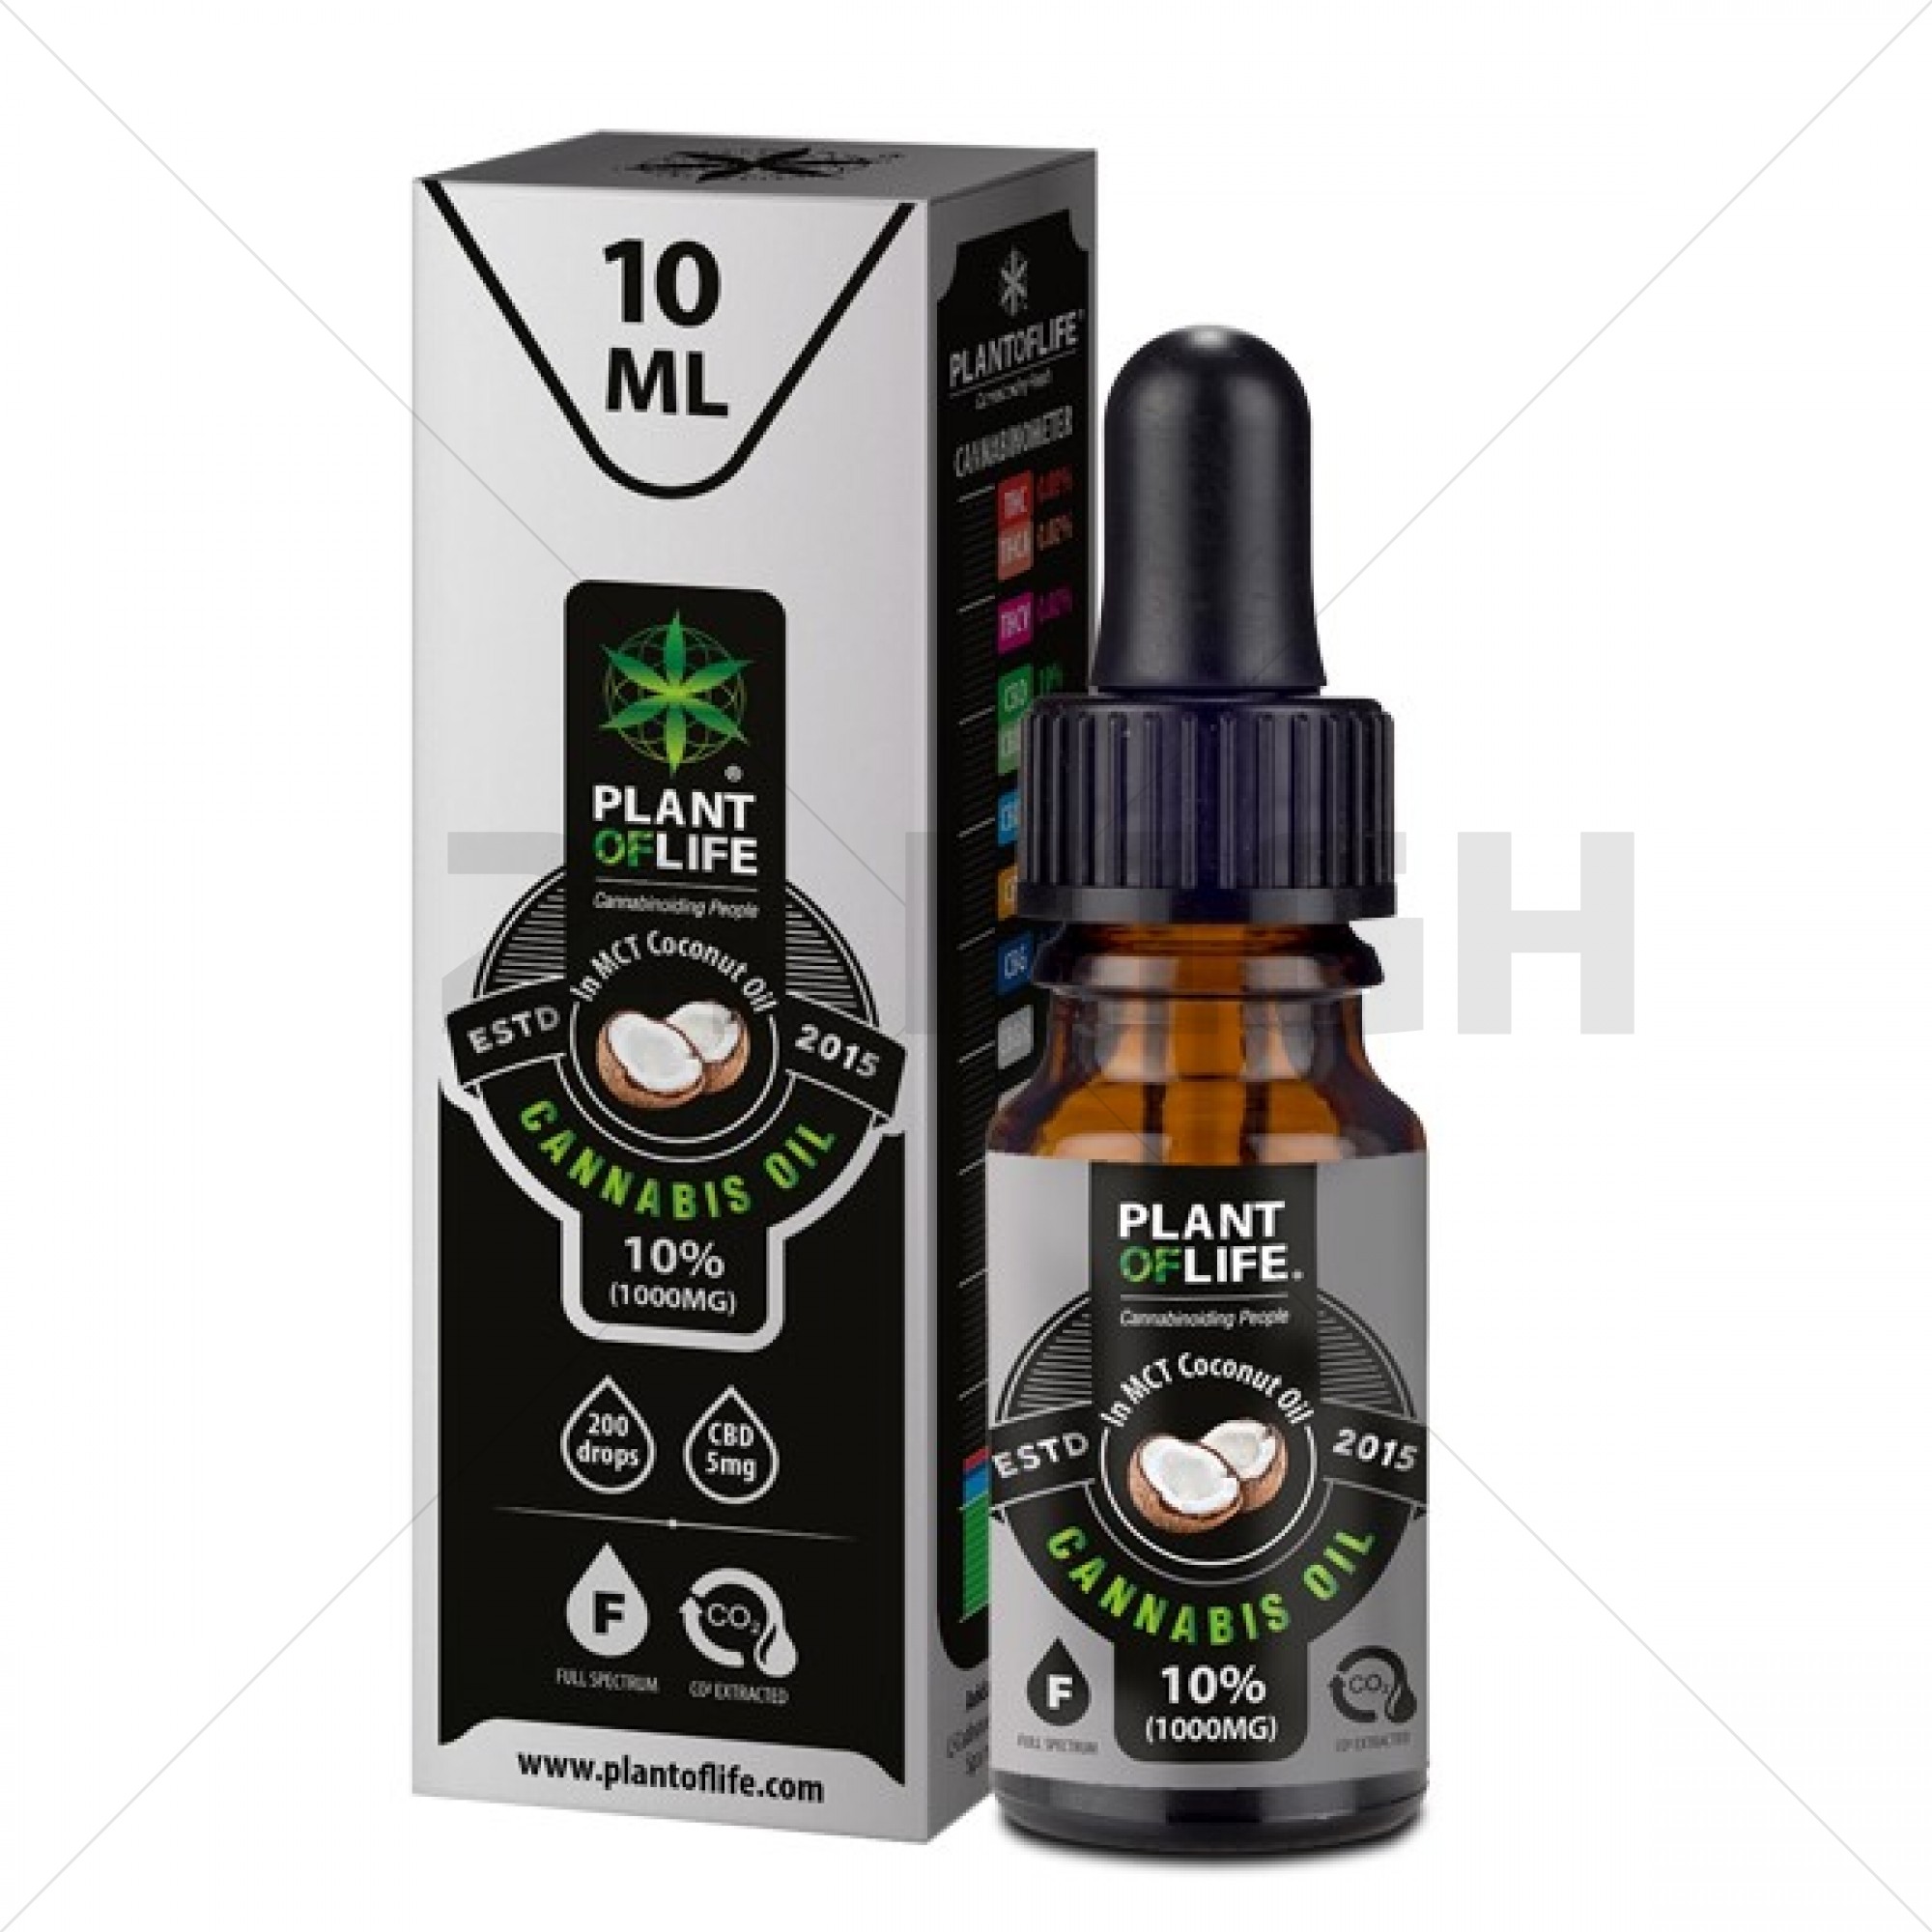 Plant of Life Cannabis Oil with MCT Coconut Oil - 10% CBD (1000mg)